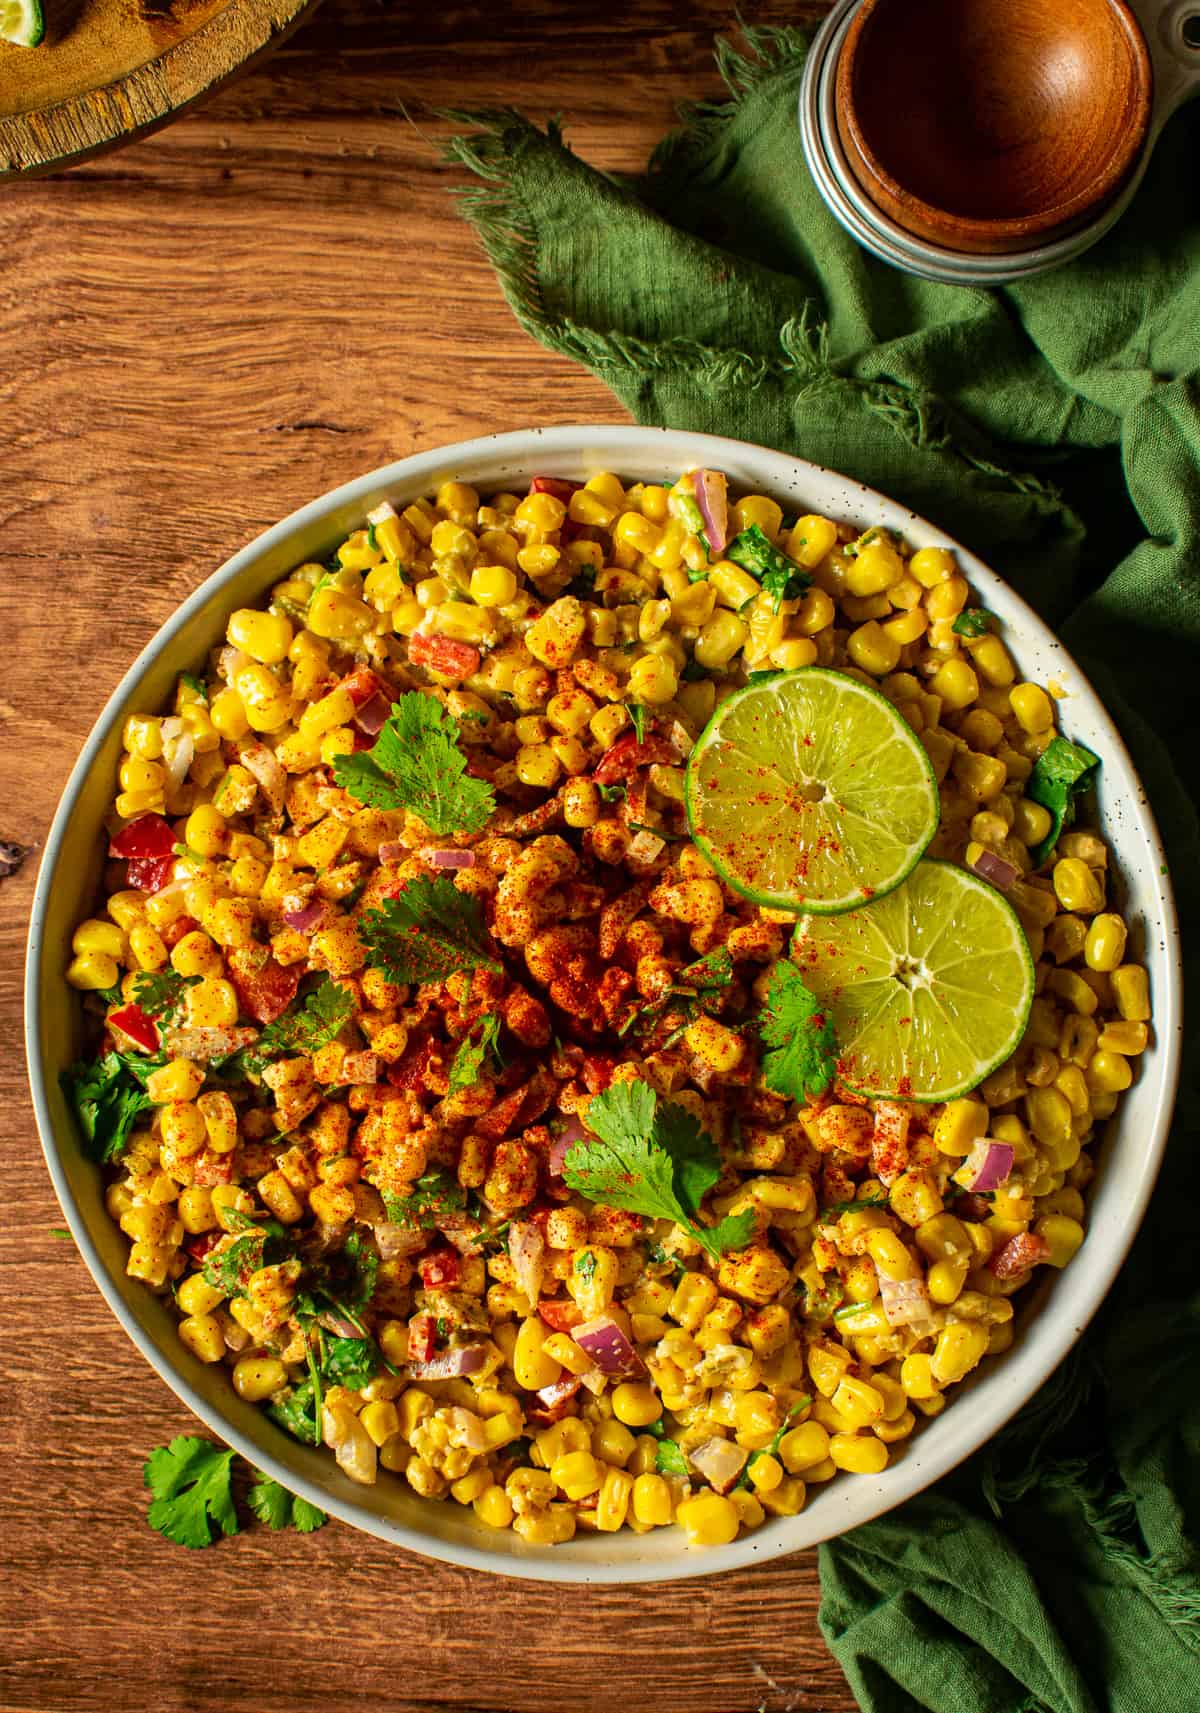 Mexican street corn salad in bowl with slices of lime.